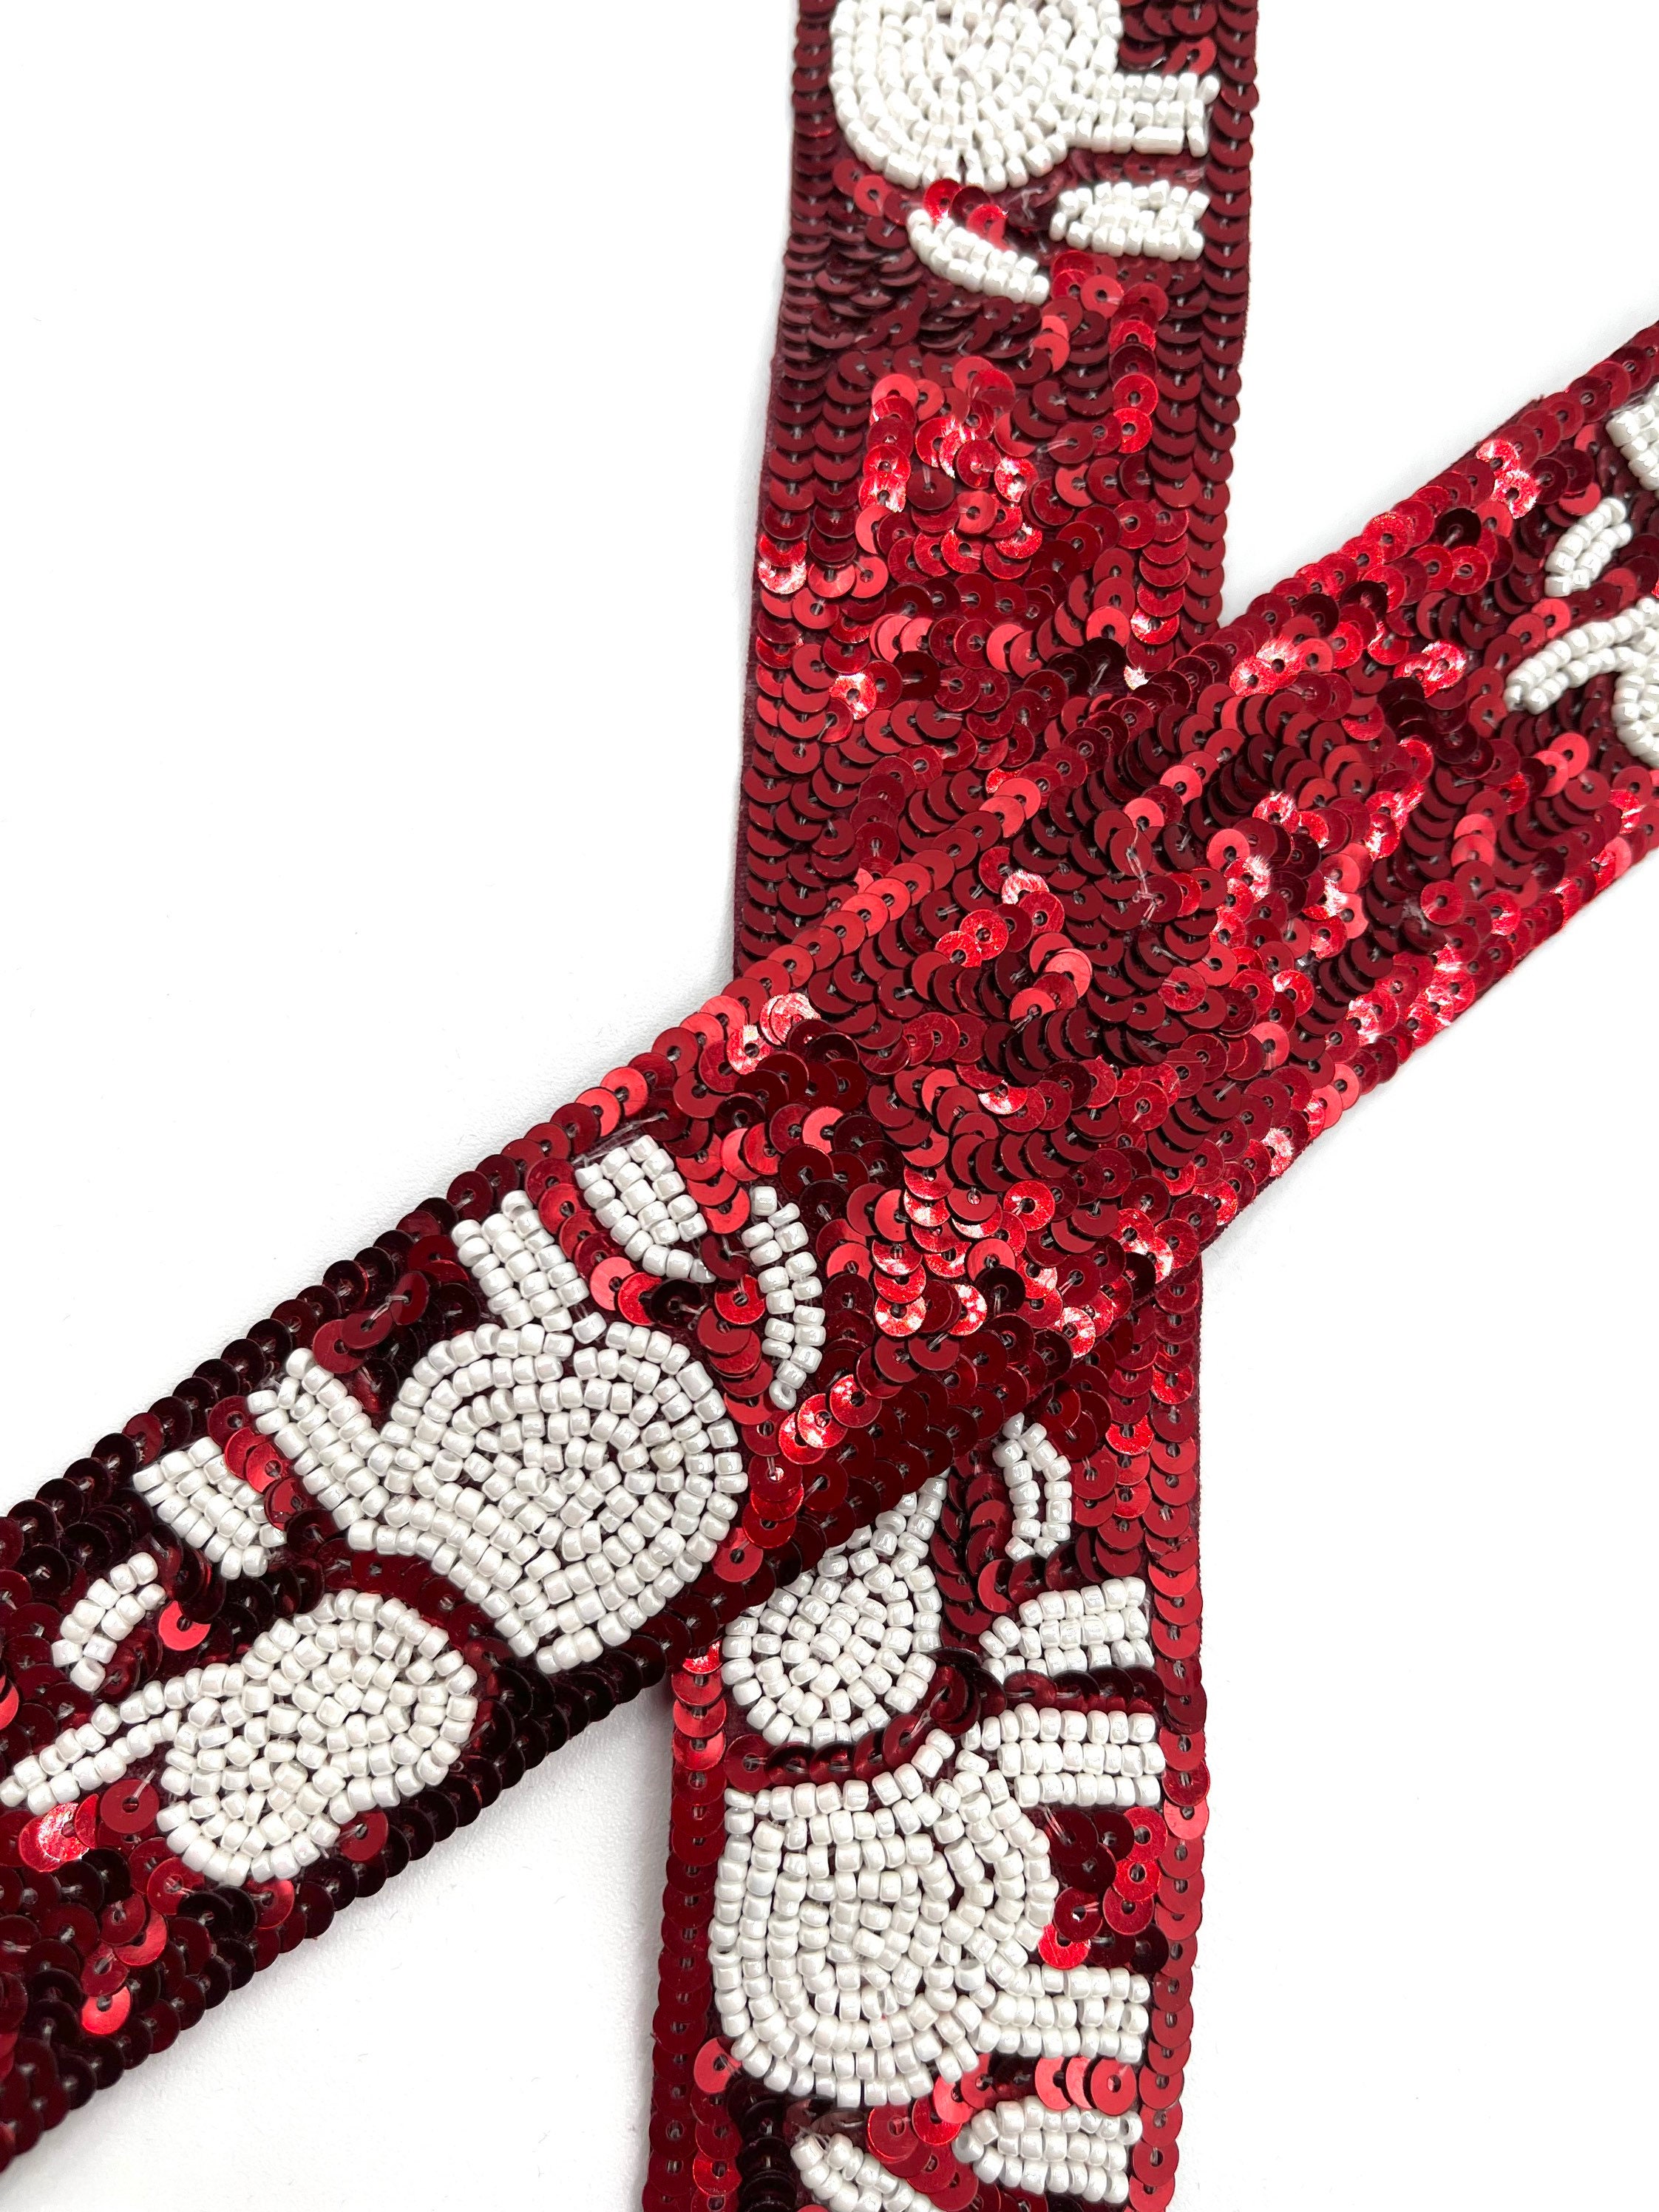 University of Alabama Script A Bama Beaded Purse Strap in White/Red Size 21 x 1.5